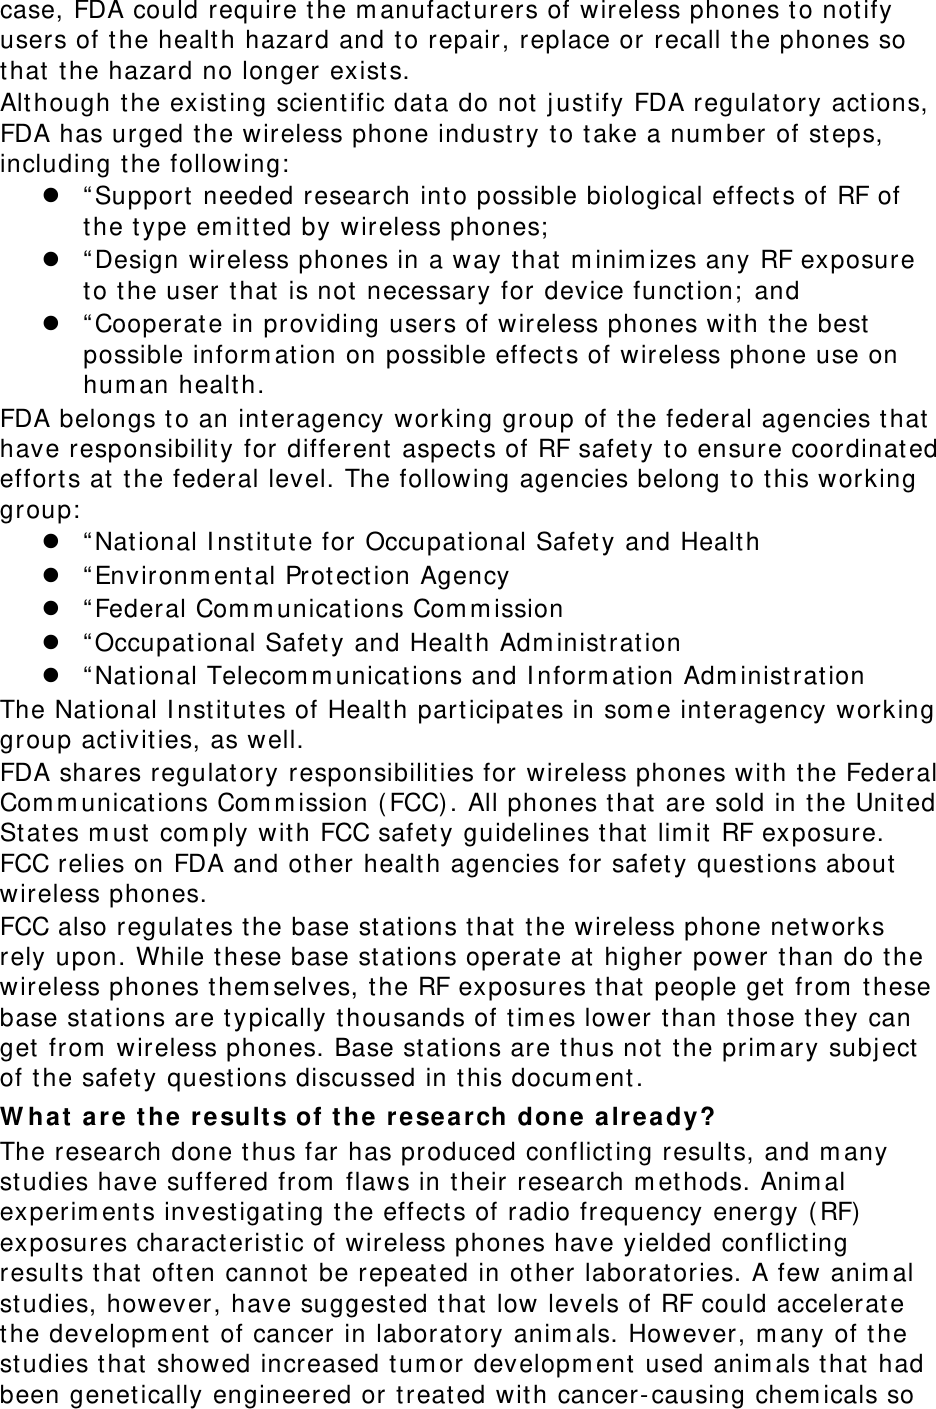 case, FDA could require t he m anufact urers of w ireless phones t o not ify users of t he health hazard and t o repair, replace or recall t he phones so that the hazard no longer exist s. Alt hough t he existing scient ific dat a do not j ust ify FDA regulat ory actions, FDA has urged the wireless phone industry to t ake a num ber of st eps, including t he following:  z “ Support  needed research int o possible biological effect s of RF of the type em itt ed by wireless phones;  z “ Design wireless phones in a way t hat m inim izes any RF exposure to the user t hat is not necessary for device funct ion;  and z “ Cooperat e in providing users of wireless phones with t he best  possible inform ation on possible effect s of wireless phone use on hum an healt h. FDA belongs to an int eragency working group of the federal agencies t hat have responsibility for different aspect s of RF safet y t o ensure coordinat ed effort s at the federal level. The following agencies belong t o t his working group:  z “ Nat ional I nstit ut e for Occupational Safet y and Health z “ Environm ent al Prot ection Agency z “ Federal Com m unicat ions Com m ission z “ Occupational Safety and Health Adm inist ration z “ Nat ional Telecom m unications and I nform ation Adm inistrat ion The National I nstit ut es of Health participat es in som e interagency working group act ivit ies, as well. FDA shares regulatory responsibilit ies for wireless phones with t he Federal Com m unications Com m ission ( FCC) . All phones t hat  are sold in t he United St ates m ust com ply wit h FCC safety guidelines that  lim it  RF exposure. FCC relies on FDA and other health agencies for safet y quest ions about  wireless phones. FCC also regulat es the base stat ions t hat the wireless phone networks rely upon. While t hese base stat ions operate at higher power t han do t he wireless phones t hem selves, t he RF exposures that  people get from  these base stations are t ypically t housands of t im es lower than t hose they can get  from  wireless phones. Base stations are thus not the prim ary subj ect  of t he safet y quest ions discussed in this docum ent . W ha t ar e t he r esult s of t he  rese arch done alr eady? The research done thus far has produced conflict ing results, and m any studies have suffered from  flaws in their research m et hods. Anim al experim ent s invest igat ing t he effect s of radio frequency energy ( RF) exposures characterist ic of wireless phones have yielded conflict ing results that often cannot be repeated in other laboratories. A few anim al studies, however, have suggested t hat  low levels of RF could accelerat e the developm ent of cancer in laboratory anim als. However, m any of t he studies t hat showed increased tum or developm ent used anim als t hat  had been genet ically engineered or t reat ed wit h cancer- causing chem icals so 